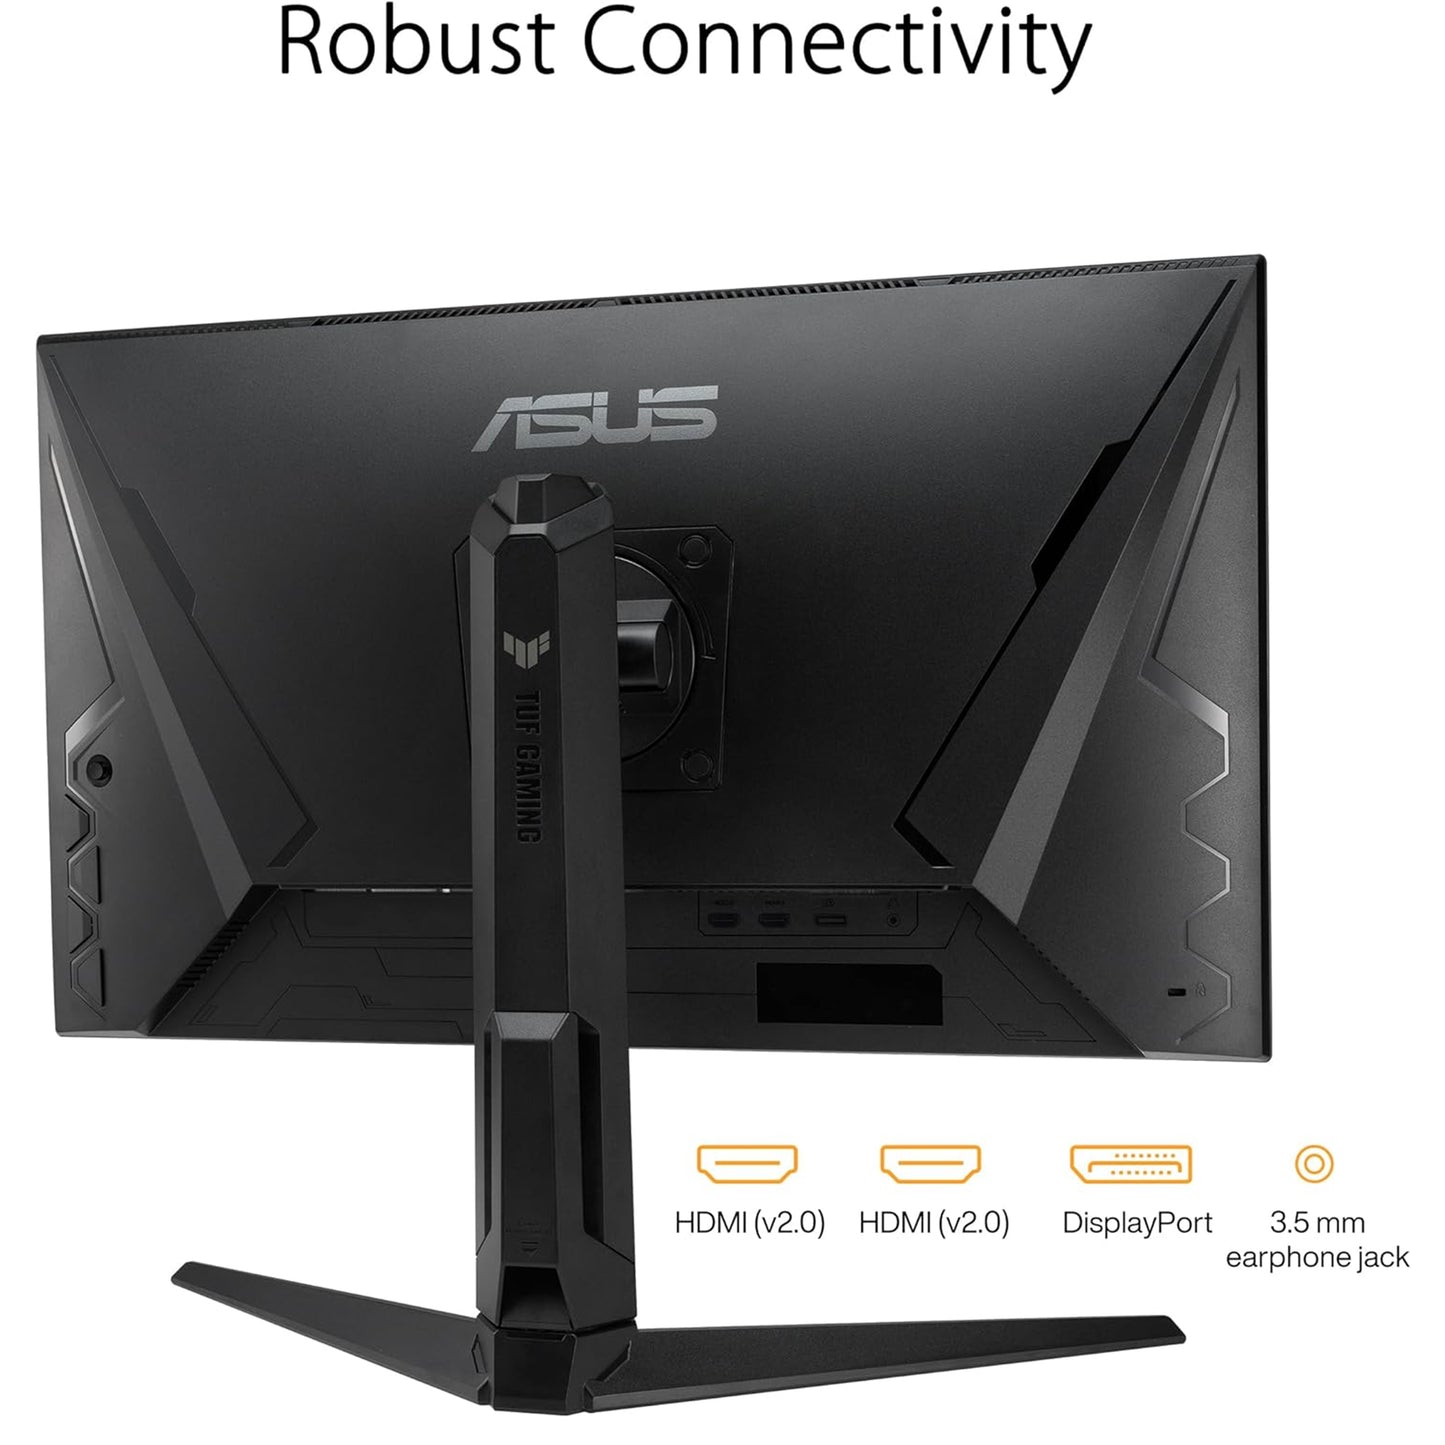 ASUS TUF Gaming 27” 1080P Monitor (VG279QL3A) - Full HD, 180Hz, 1ms, Fast IPS, Extreme Low Motion Blur, FreeSync Premium, G-SYNC Compatible, Speakers, DisplayPort, Height Adjustable